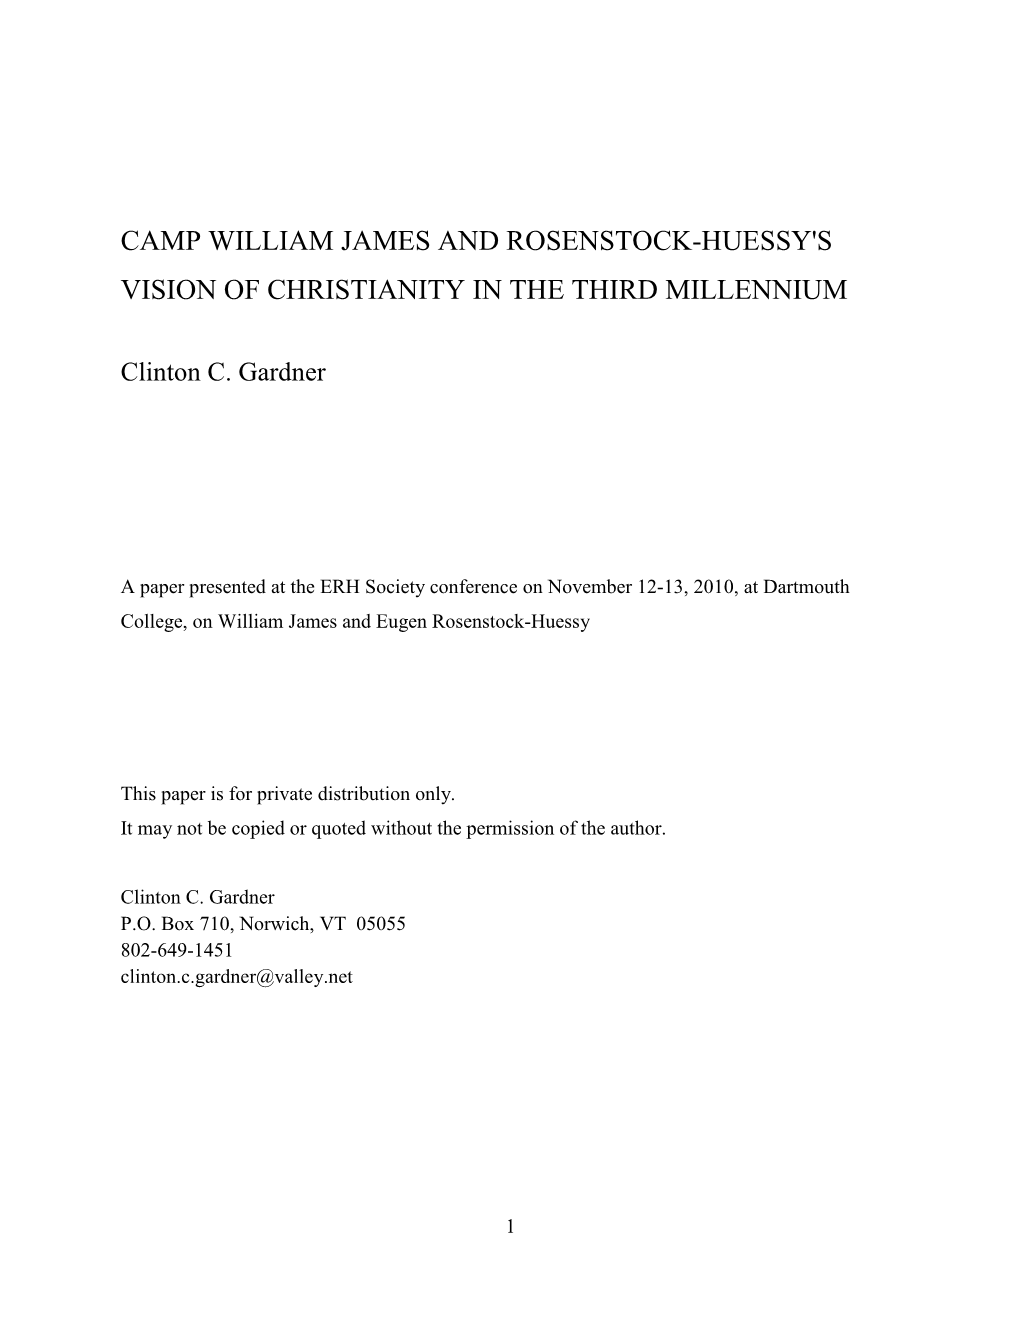 Camp William James and Rosenstock-Huessy's Vision of Christianity in the Third Millennium